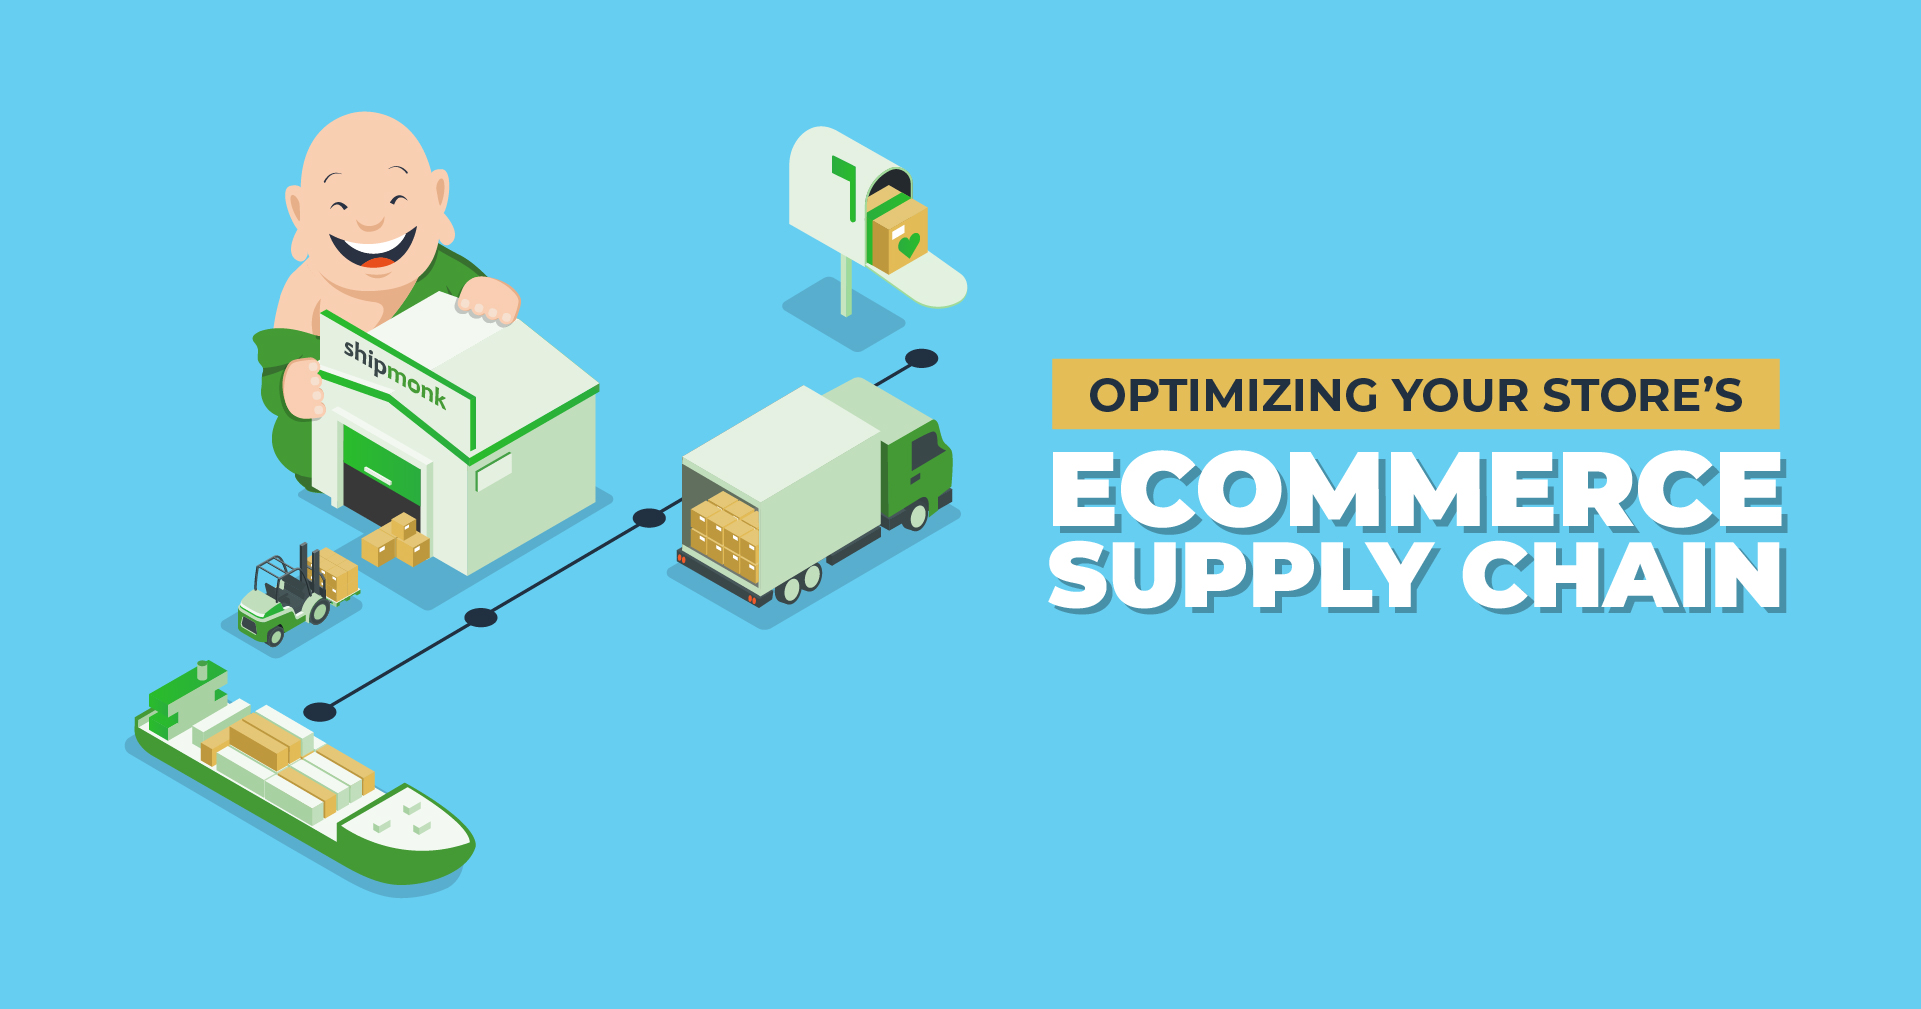 Optimizing Your Store's Ecommerce Supply Chain